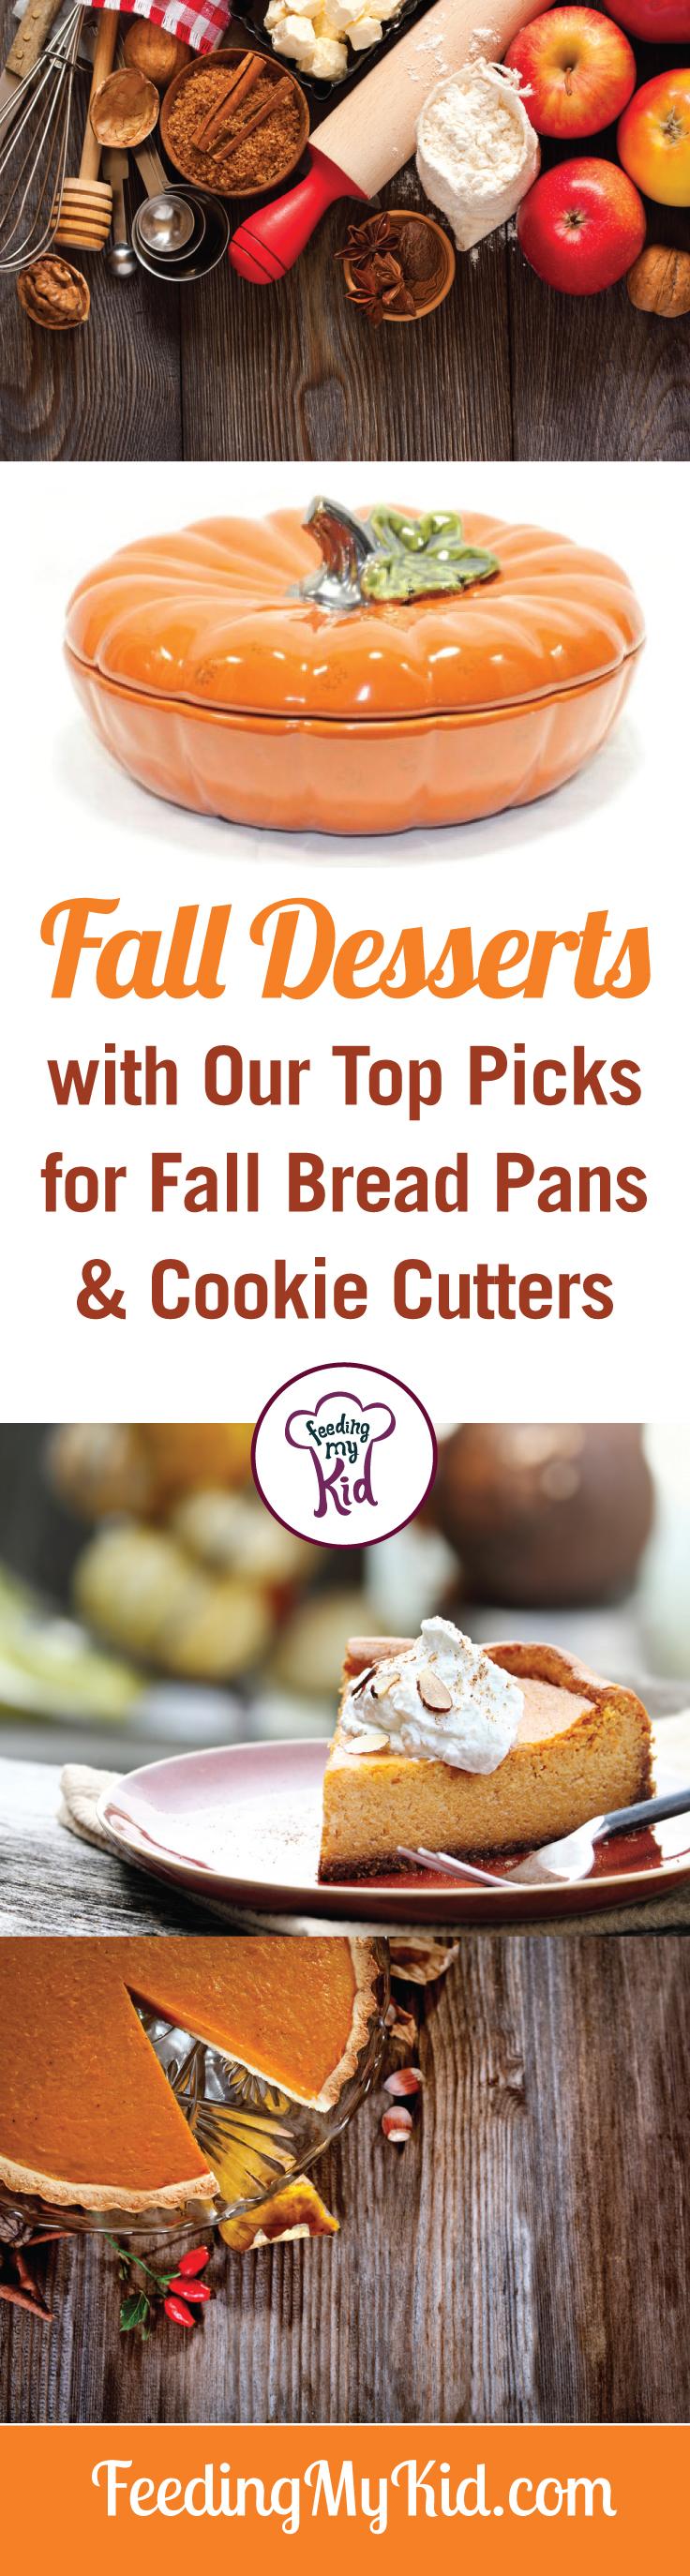 Check out our favorite baking pans and cookie cutters all shaped to help you celebrate Fall. Create tasty fall desserts using these Fall themed bakeware.